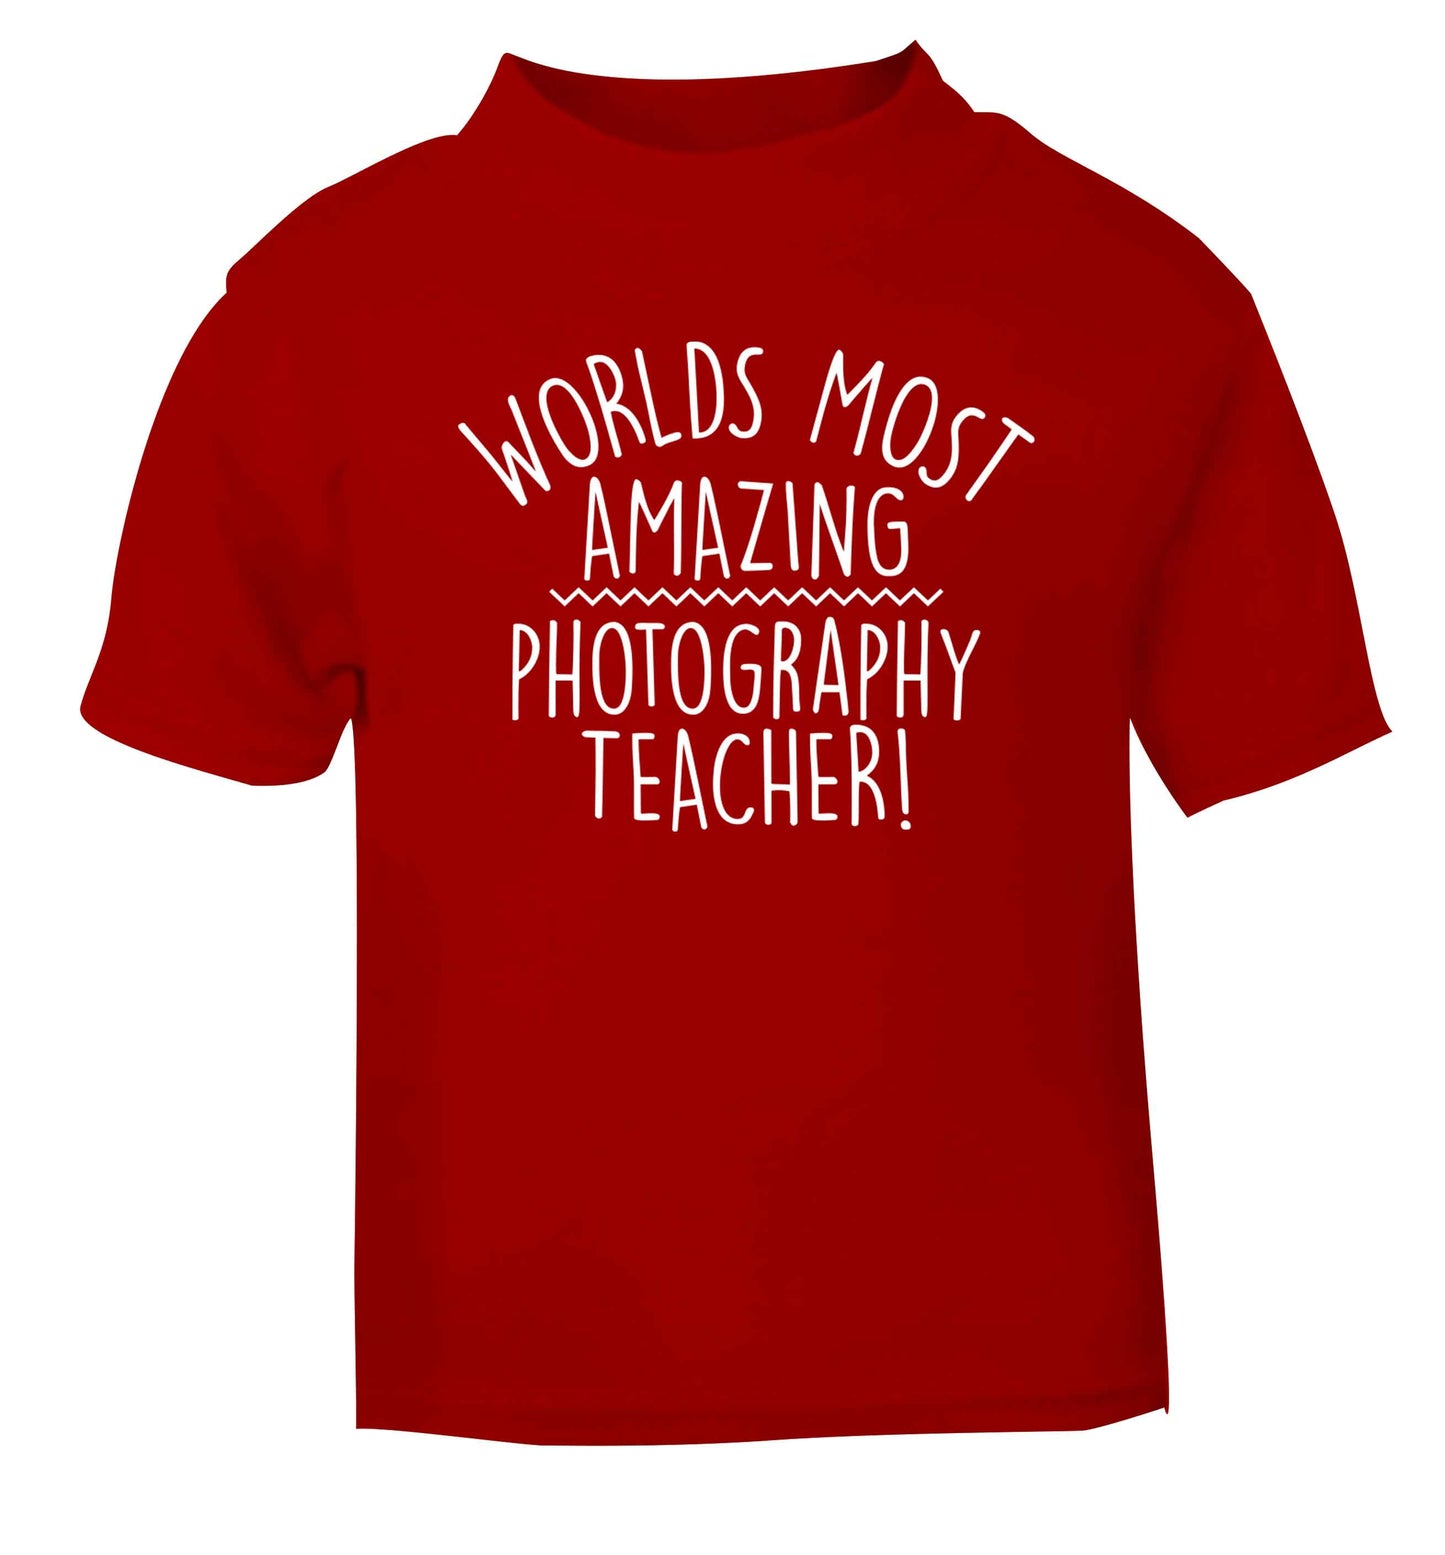 Worlds most amazing photography teacher red baby toddler Tshirt 2 Years